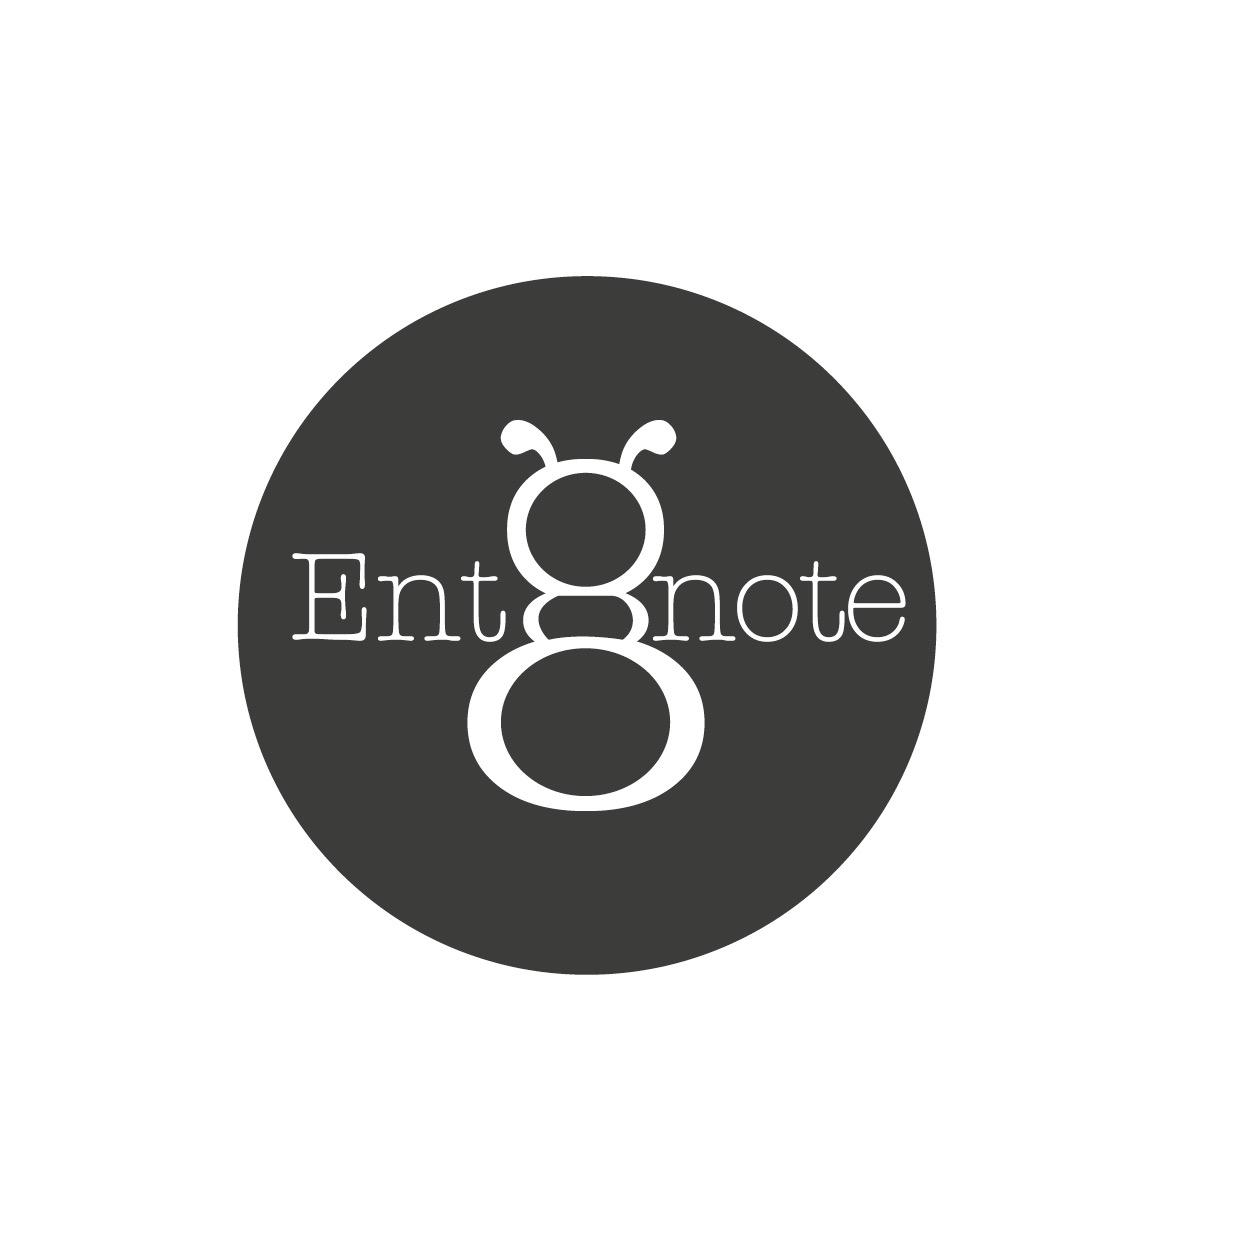 Entomophagy Expert Consultant | Entonote wants to promote entomophagy for a more sustainable future
#insectsrevolution
#changefuturefood